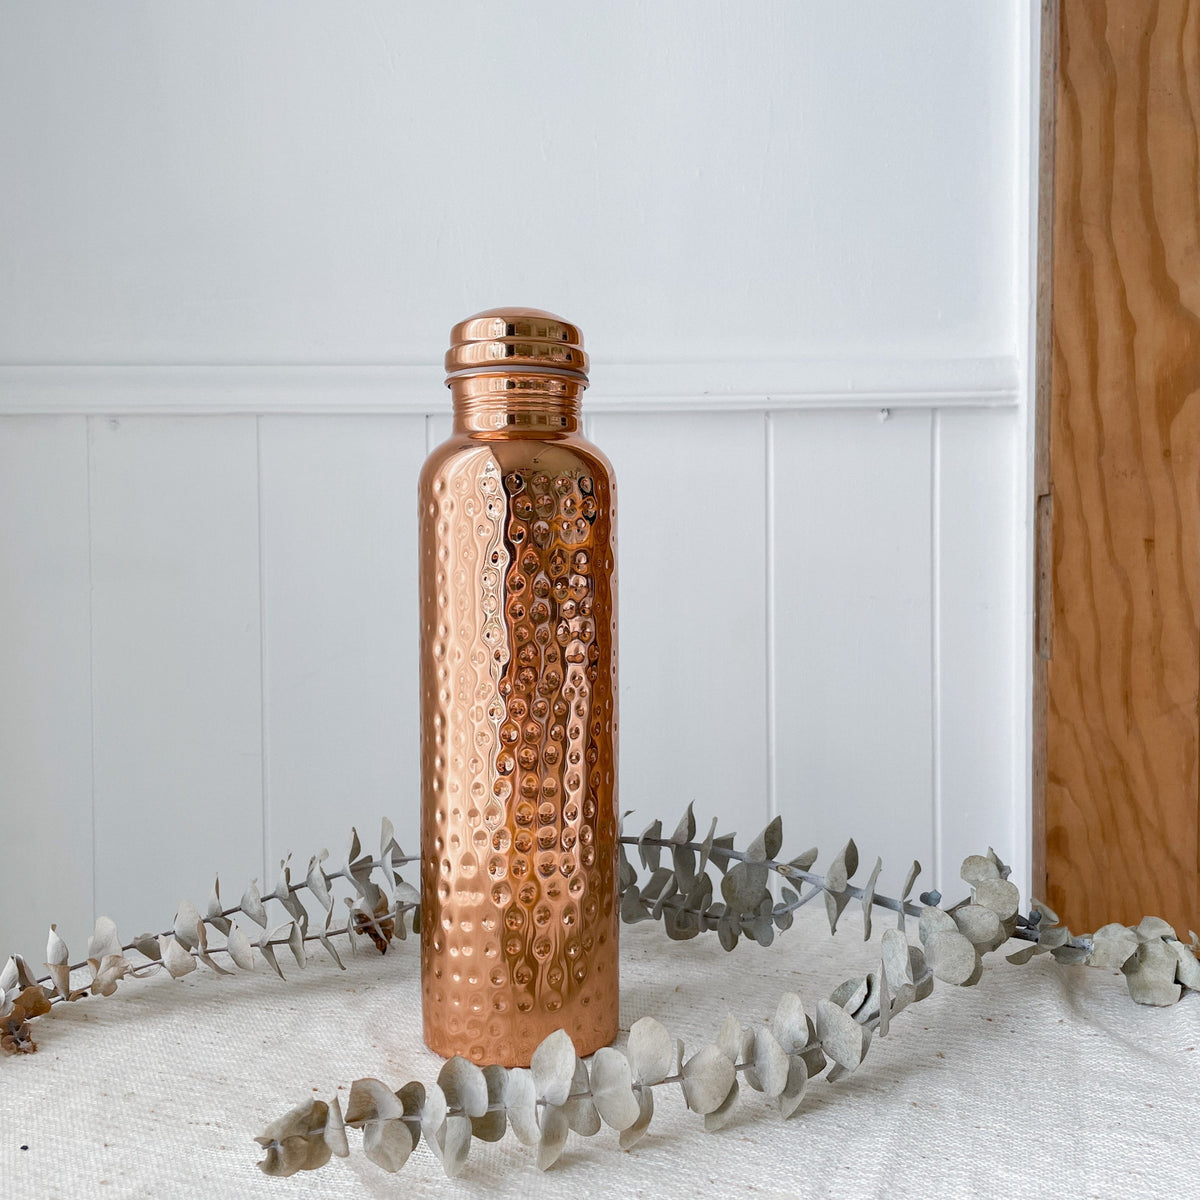 EcoBottles – Pure Copper Water Bottles 700ml Eco-Friendly Non-Insulated  Copper Bottles